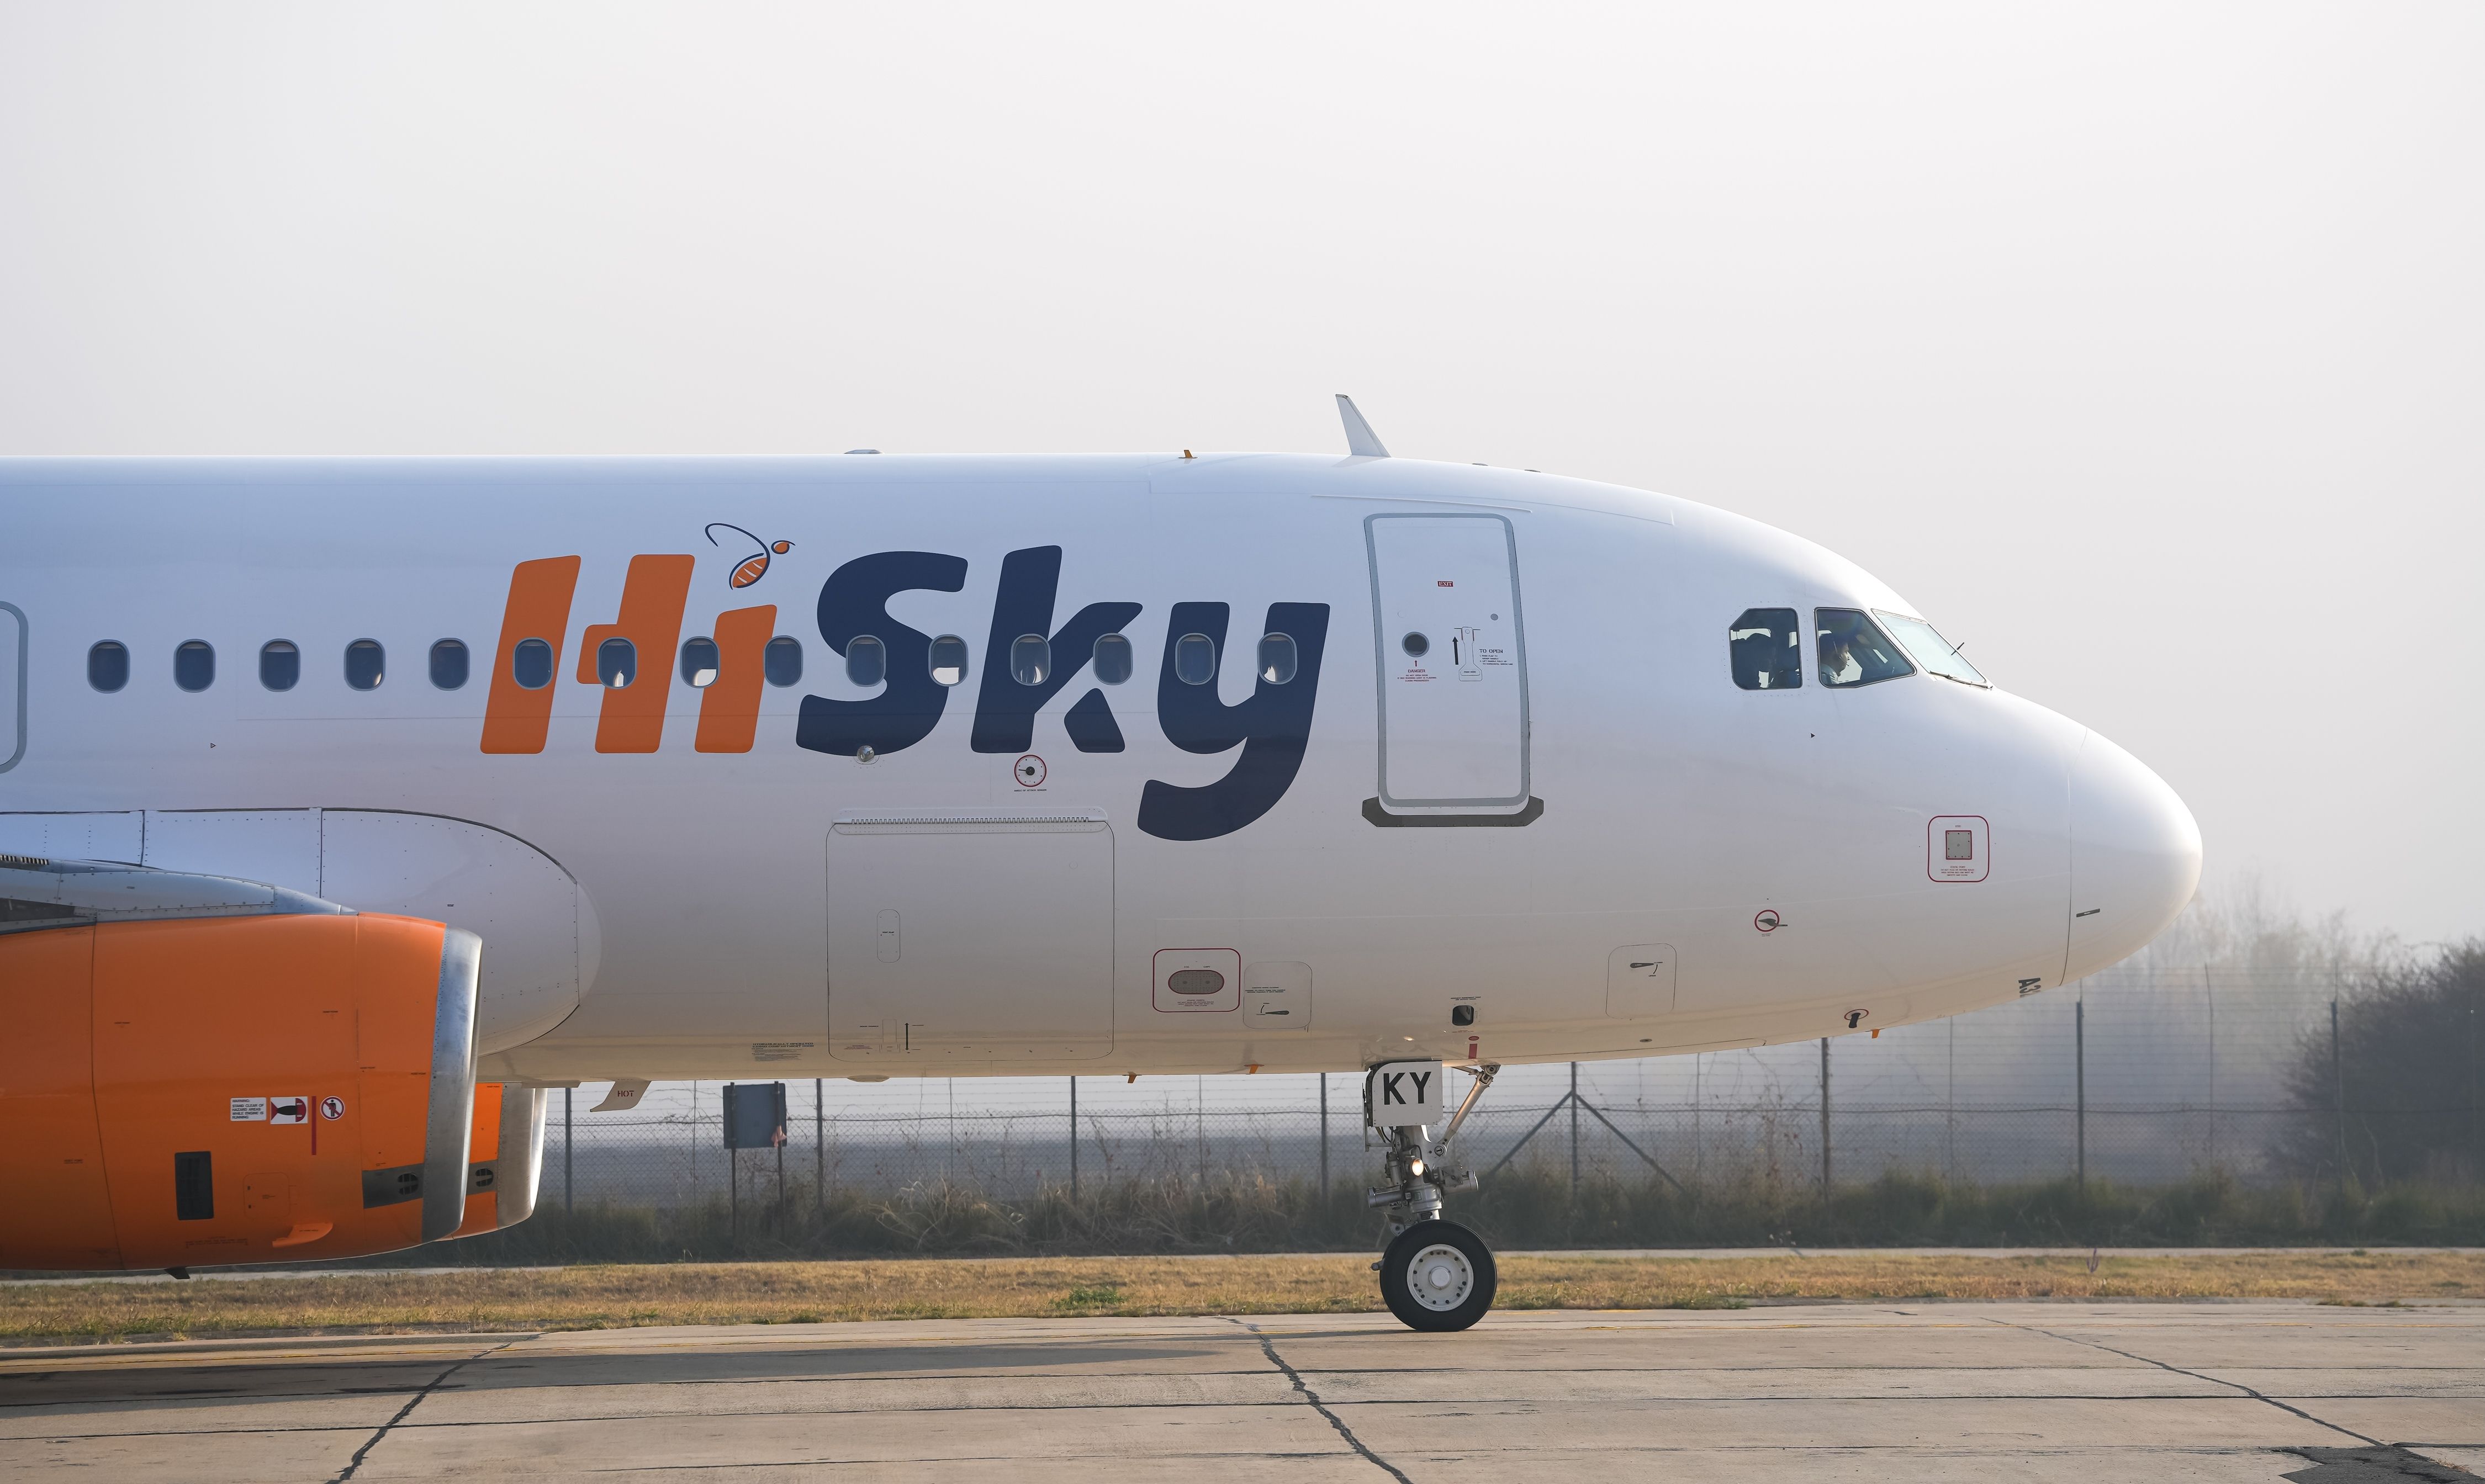 A HiSky Airbus taxiing